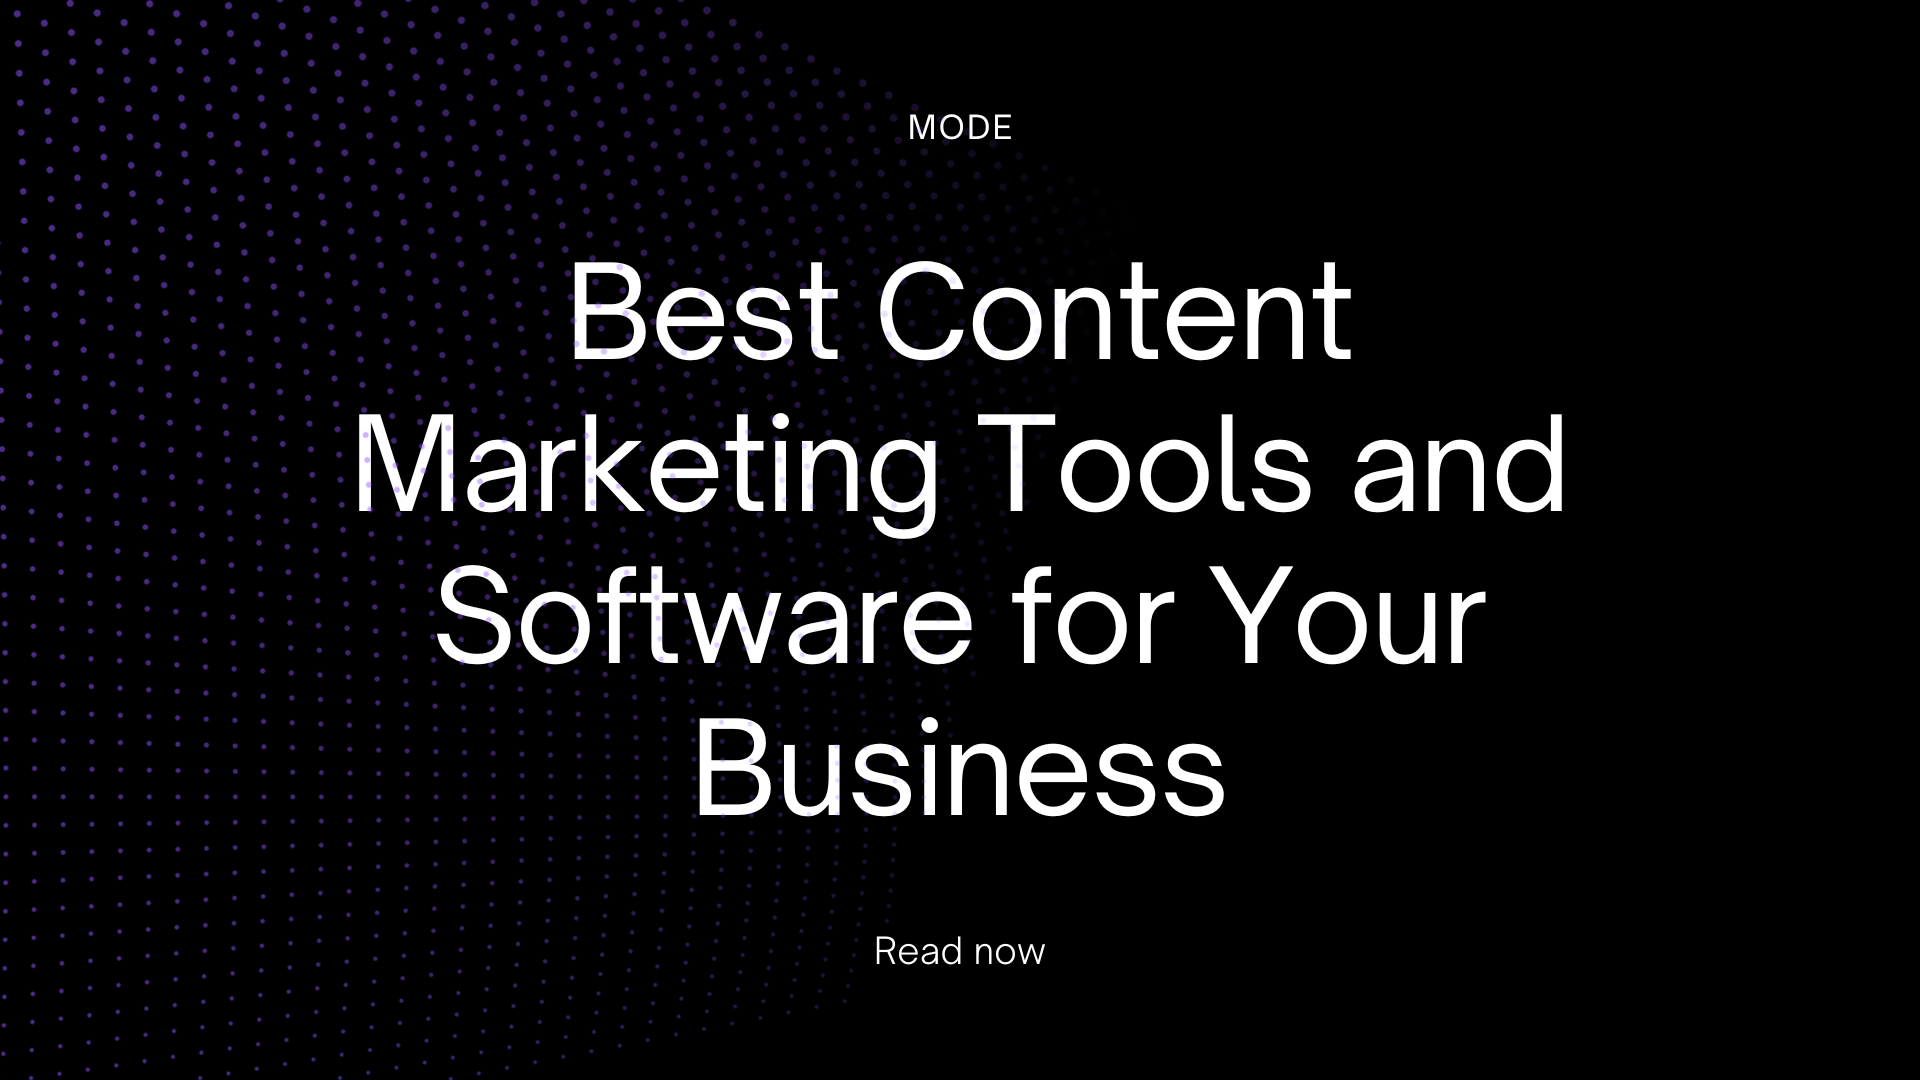 Best Content Marketing Tools and Software for Your Business